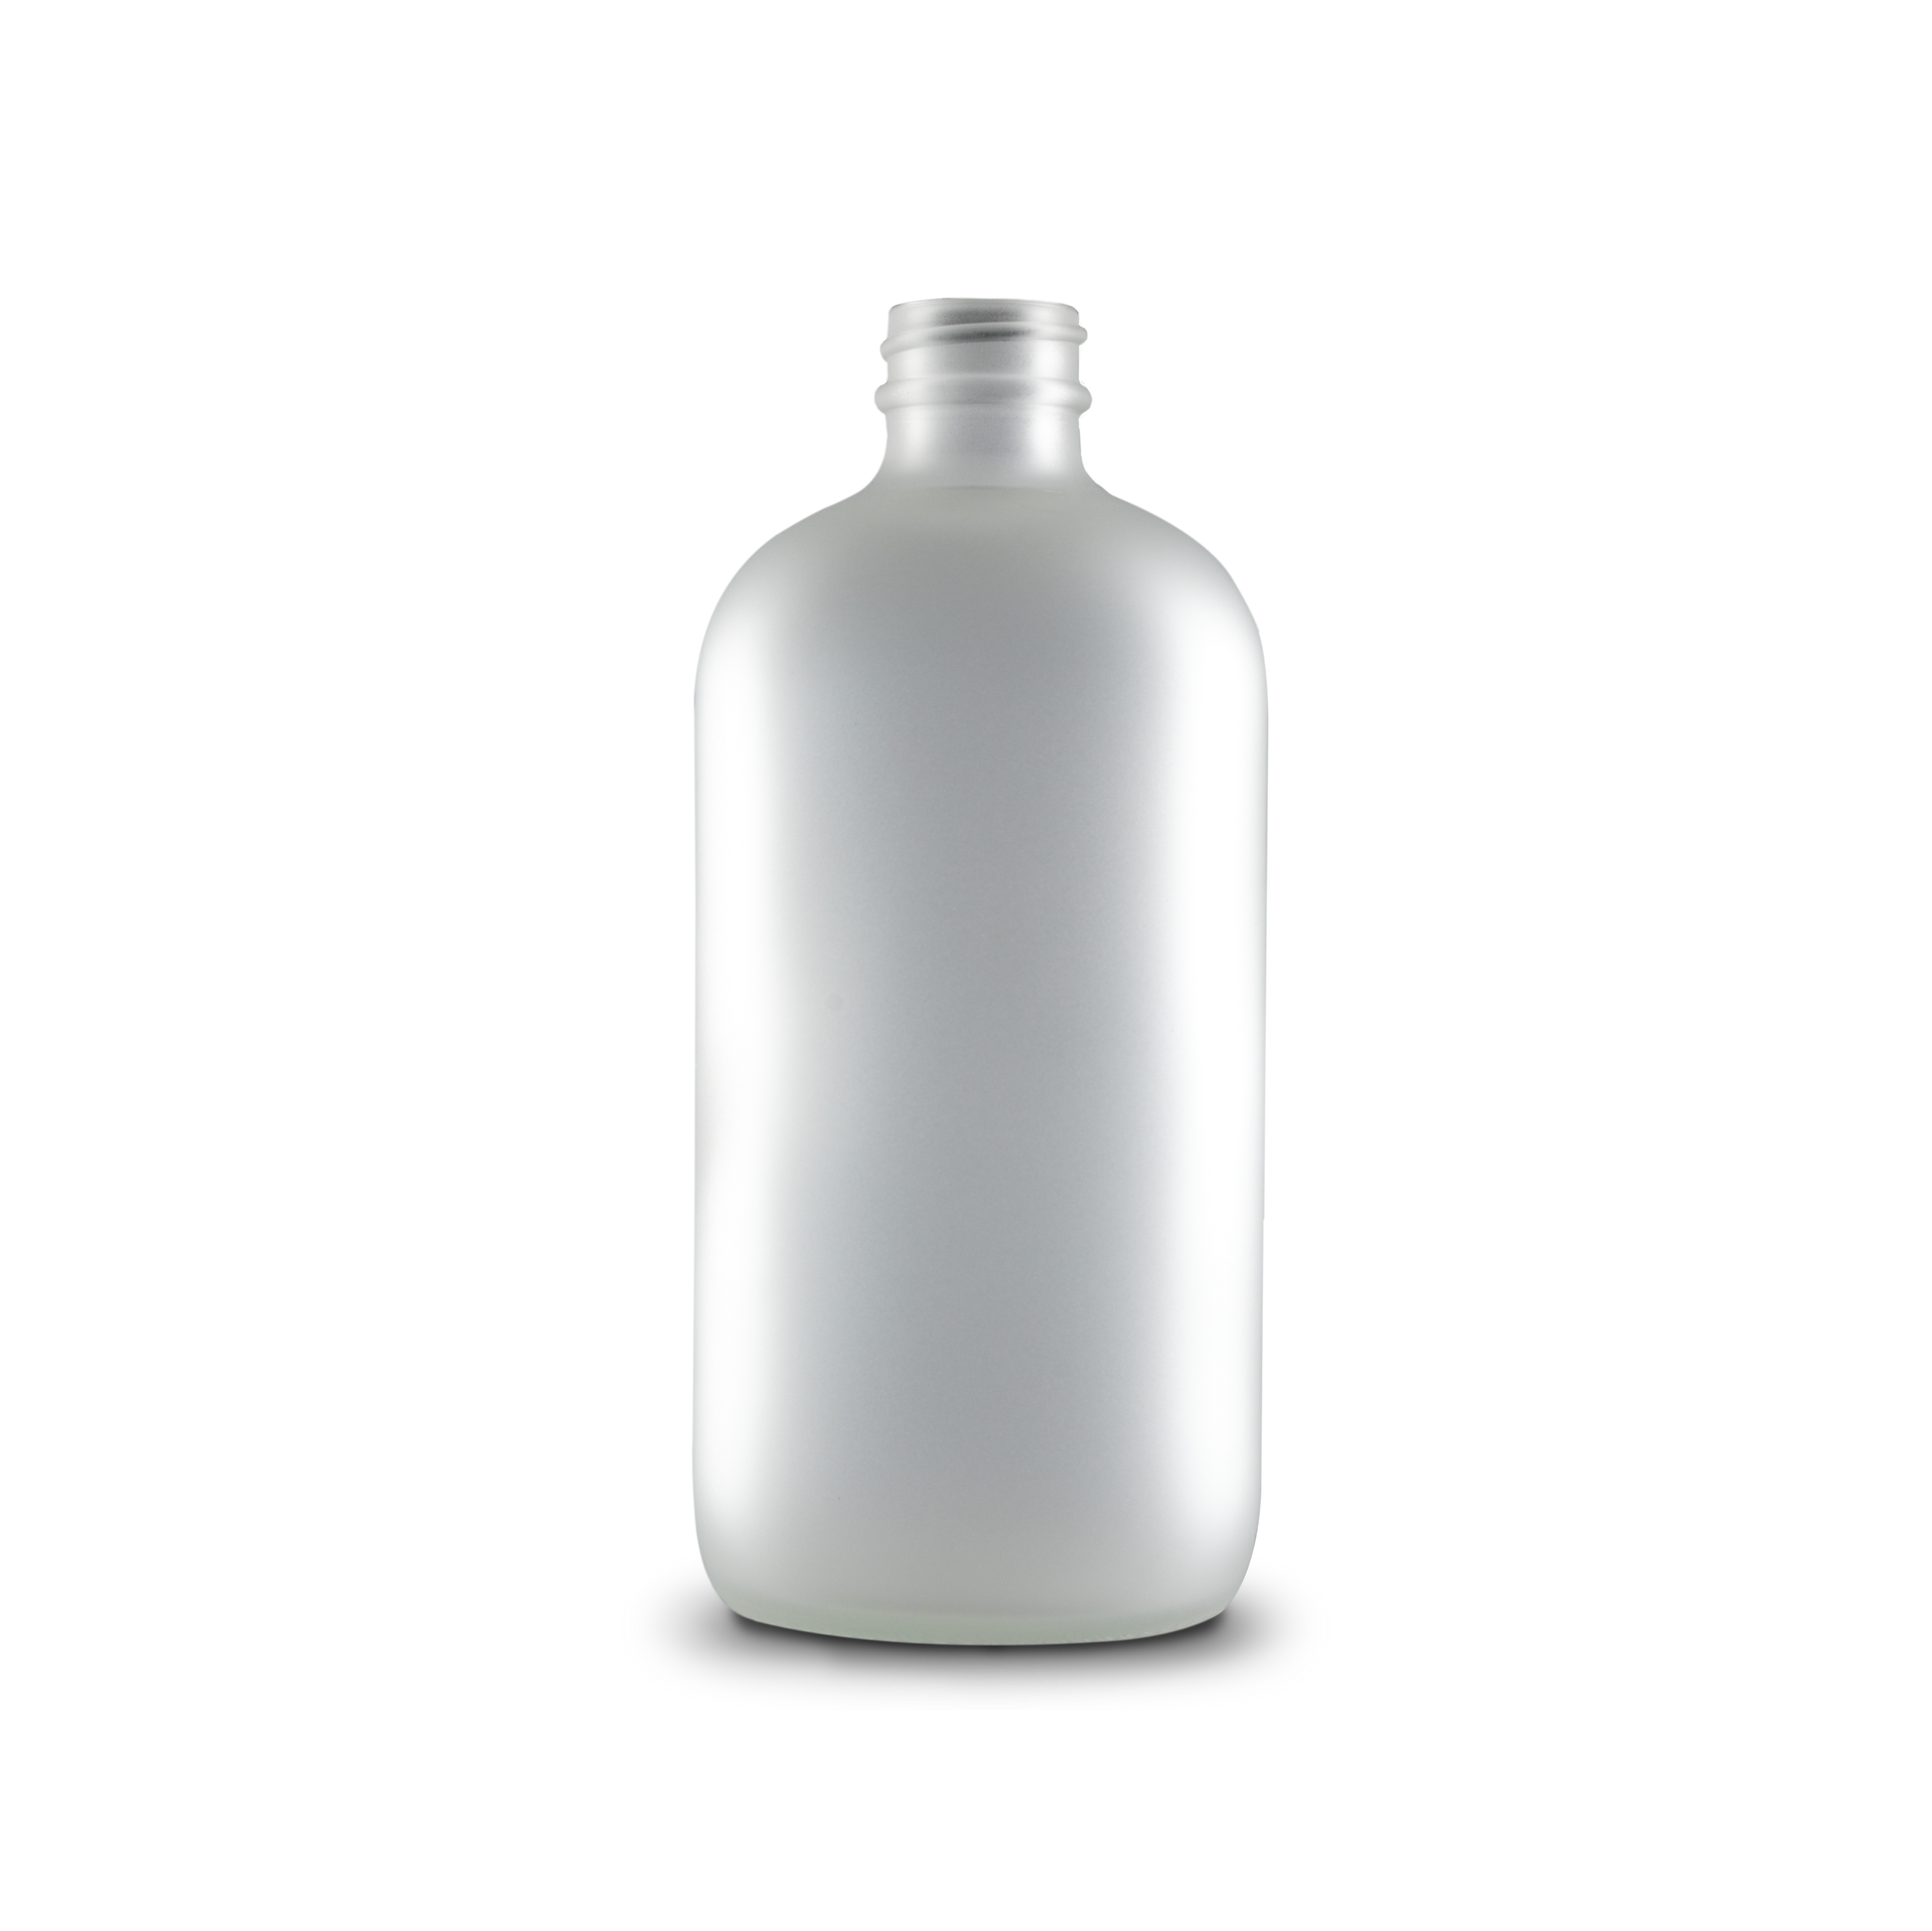 16 oz clear frosted finish is esthetically pleasing and it also provides uv protection so the contents will not degrade due to sunlight exposure.